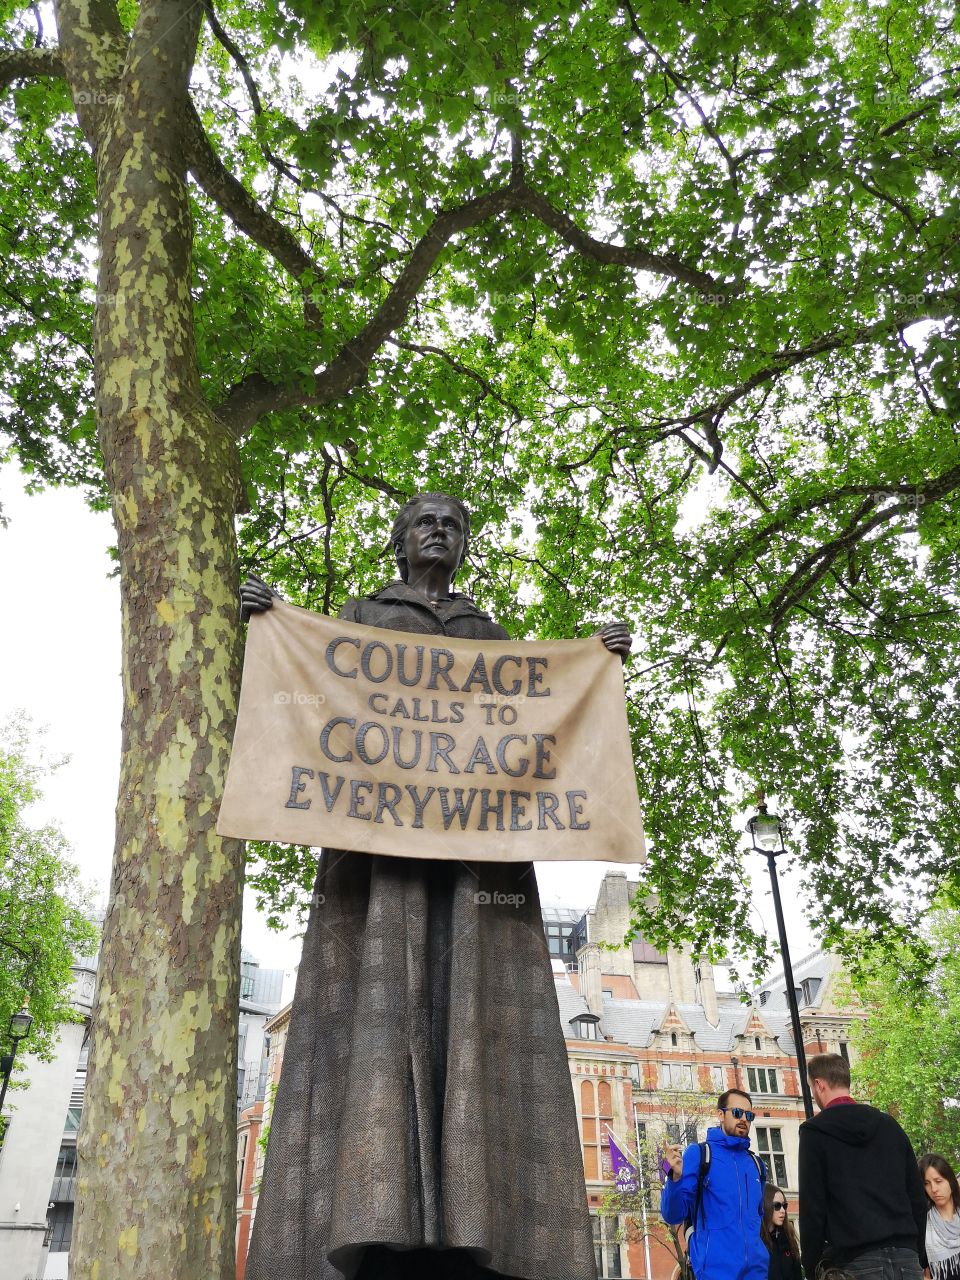 Millicent Fawcett the suffragist campaigner who helped women get the right to vote.The first female statue in Parliament Square, London.